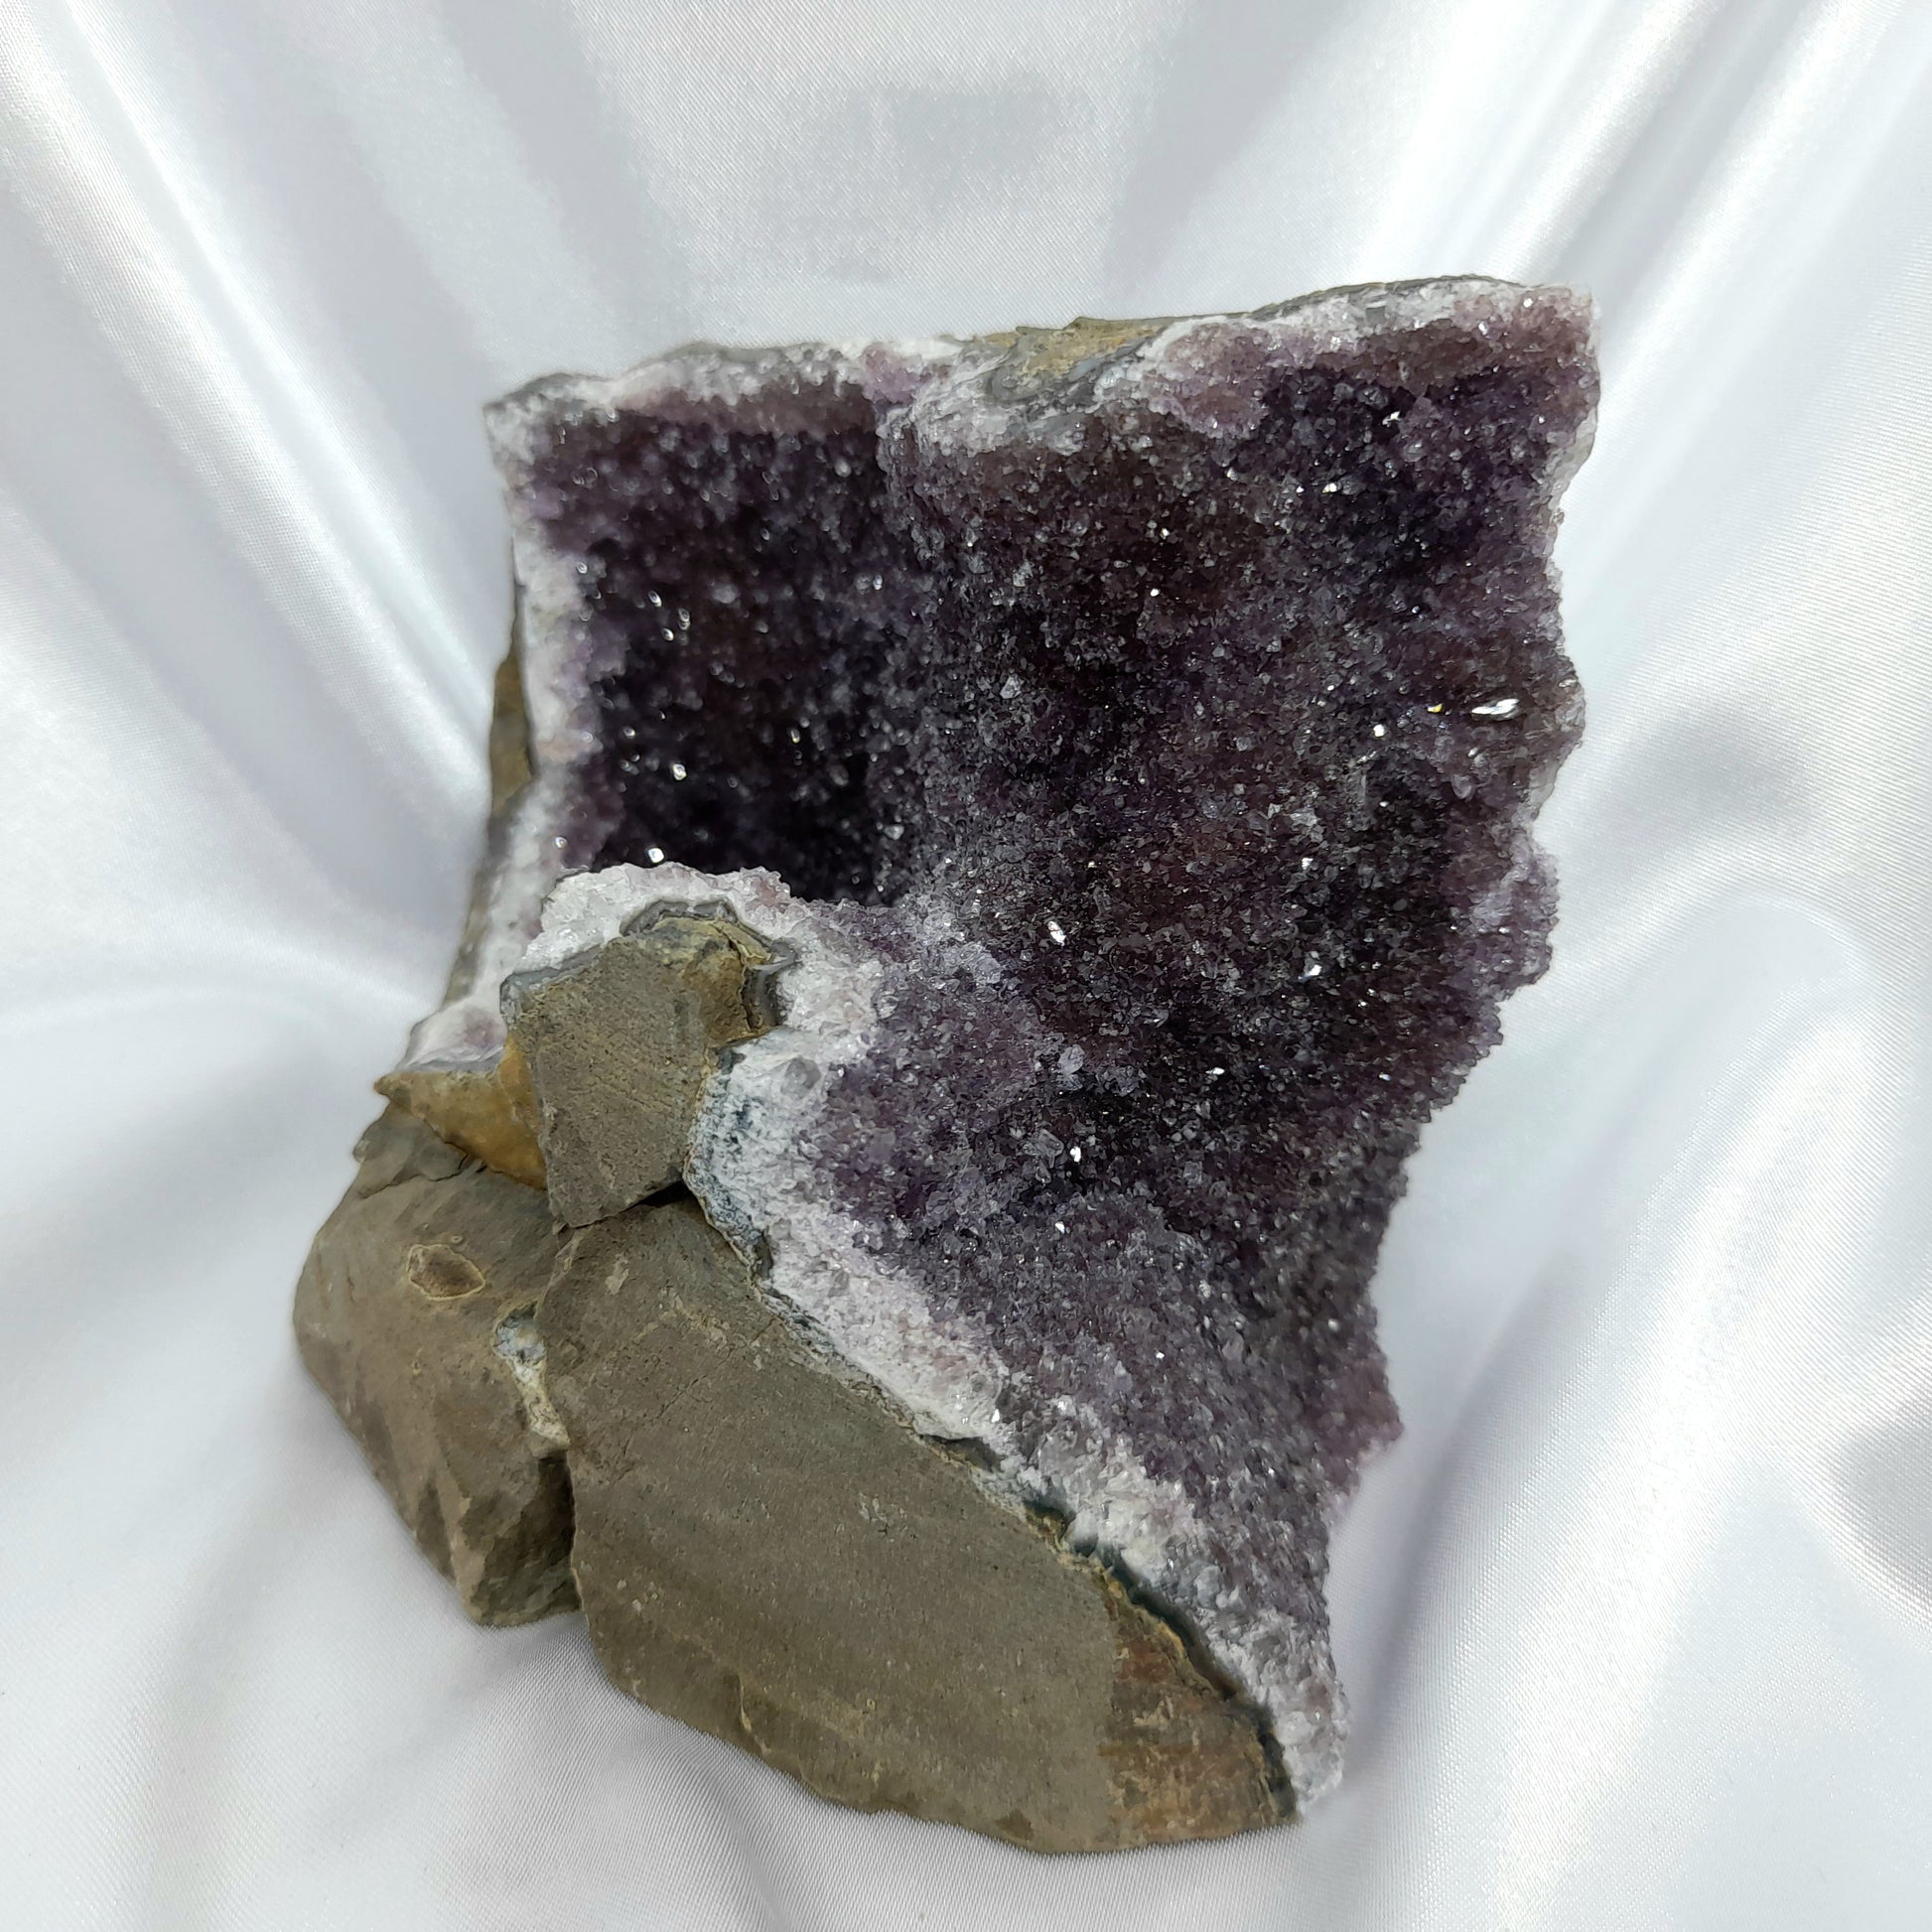 Purple Amethyst Cave - Enchanting 11cm Crystal Wonder, Eliciting Magical Sensations - A Stunning Addition to Your Space.